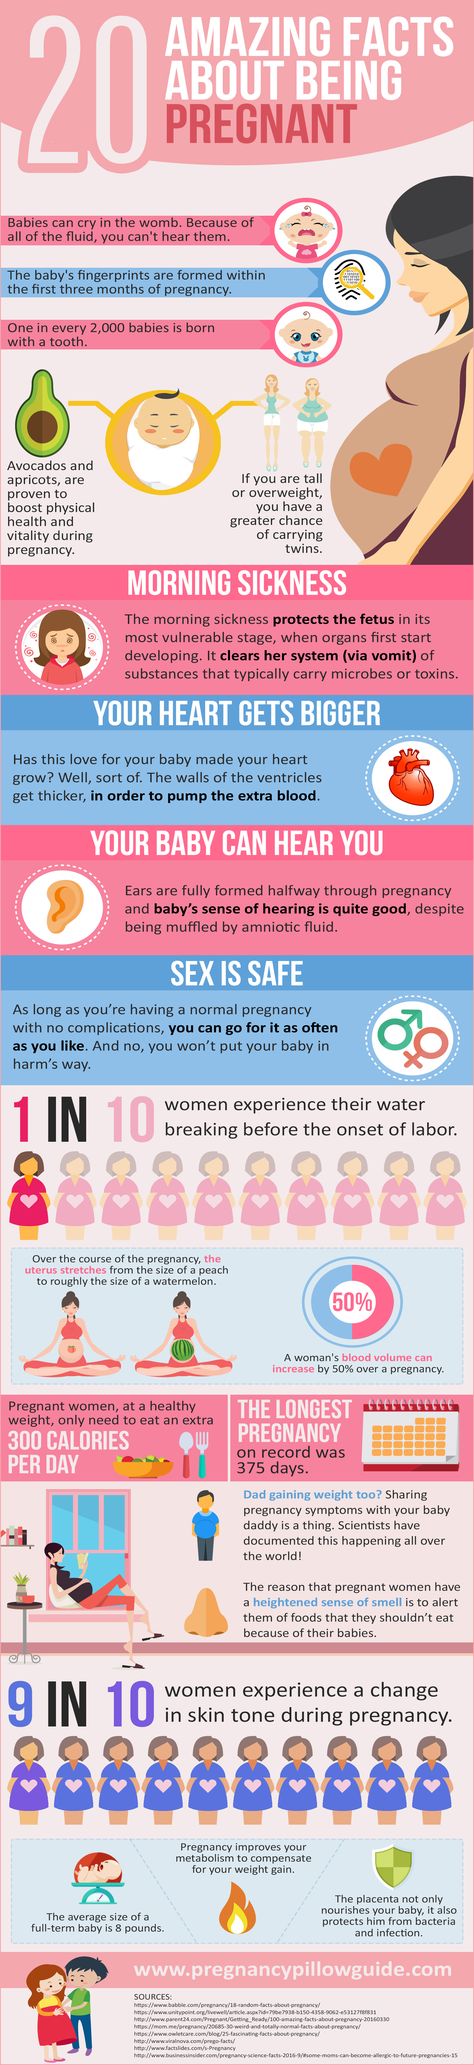 Pregnancy Health, Third Month Of Pregnancy, Pregnancy Facts, Pregnancy Advice, Being Pregnant, Pregnancy Information, Pregnancy Months, Infographic Health, Morning Sickness